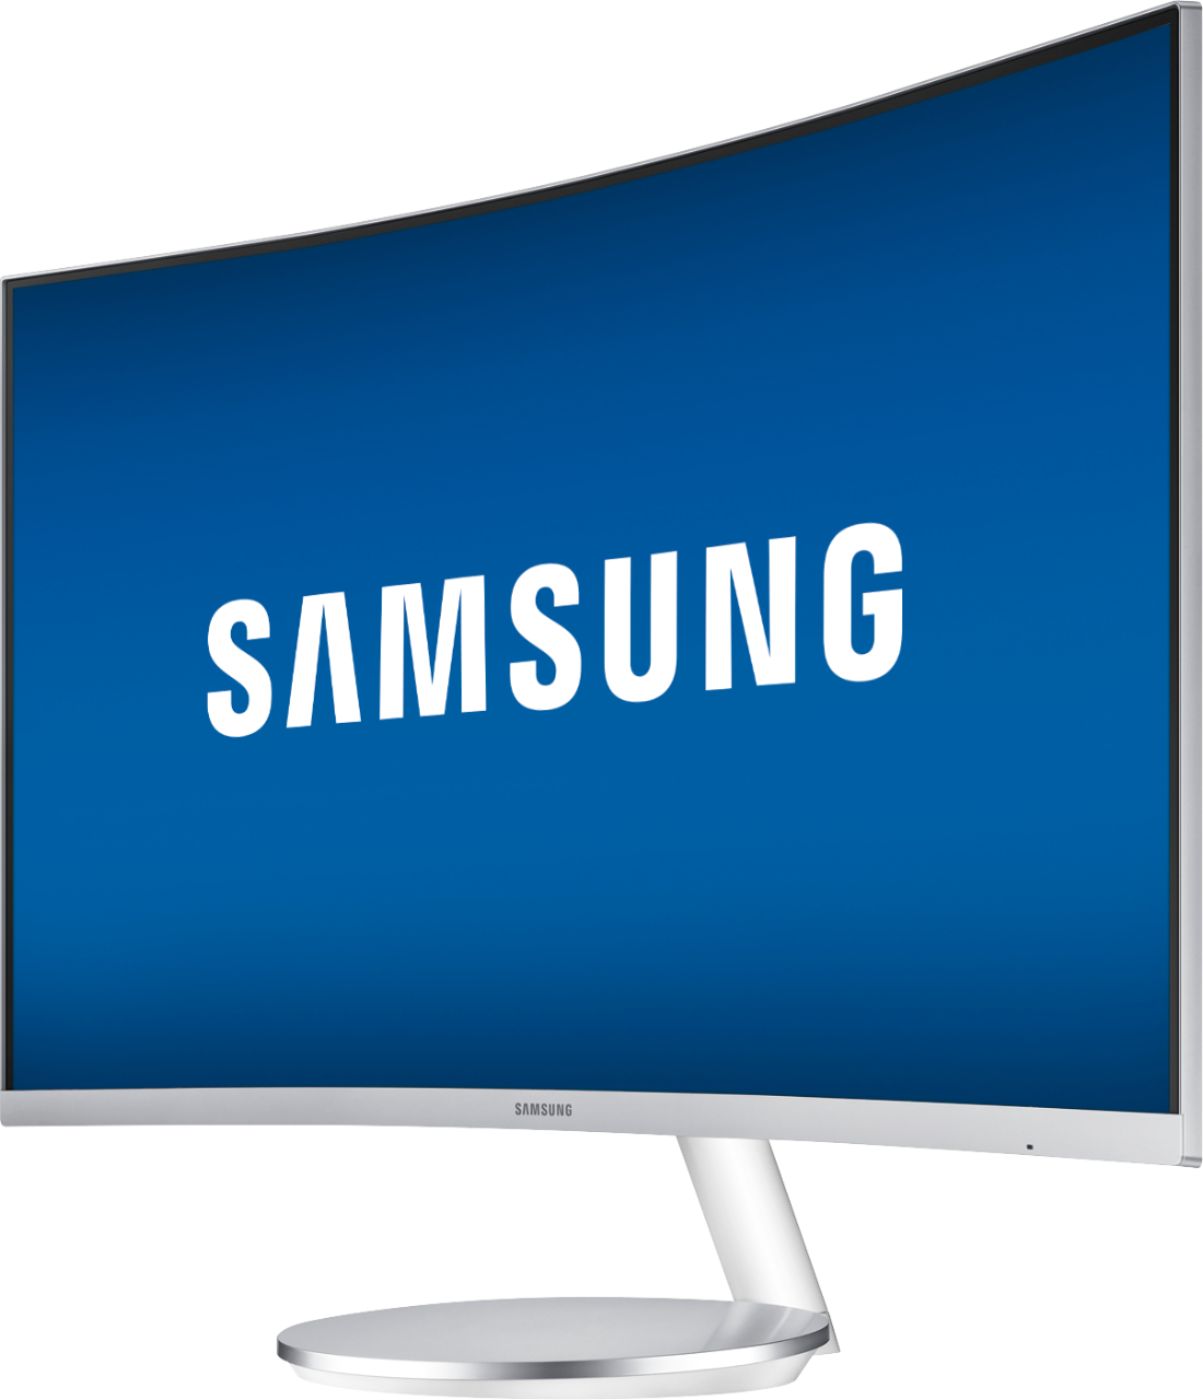 Left View: Samsung - Geek Squad Certified Refurbished 27" LED Curved FHD FreeSync Monitor - Silver